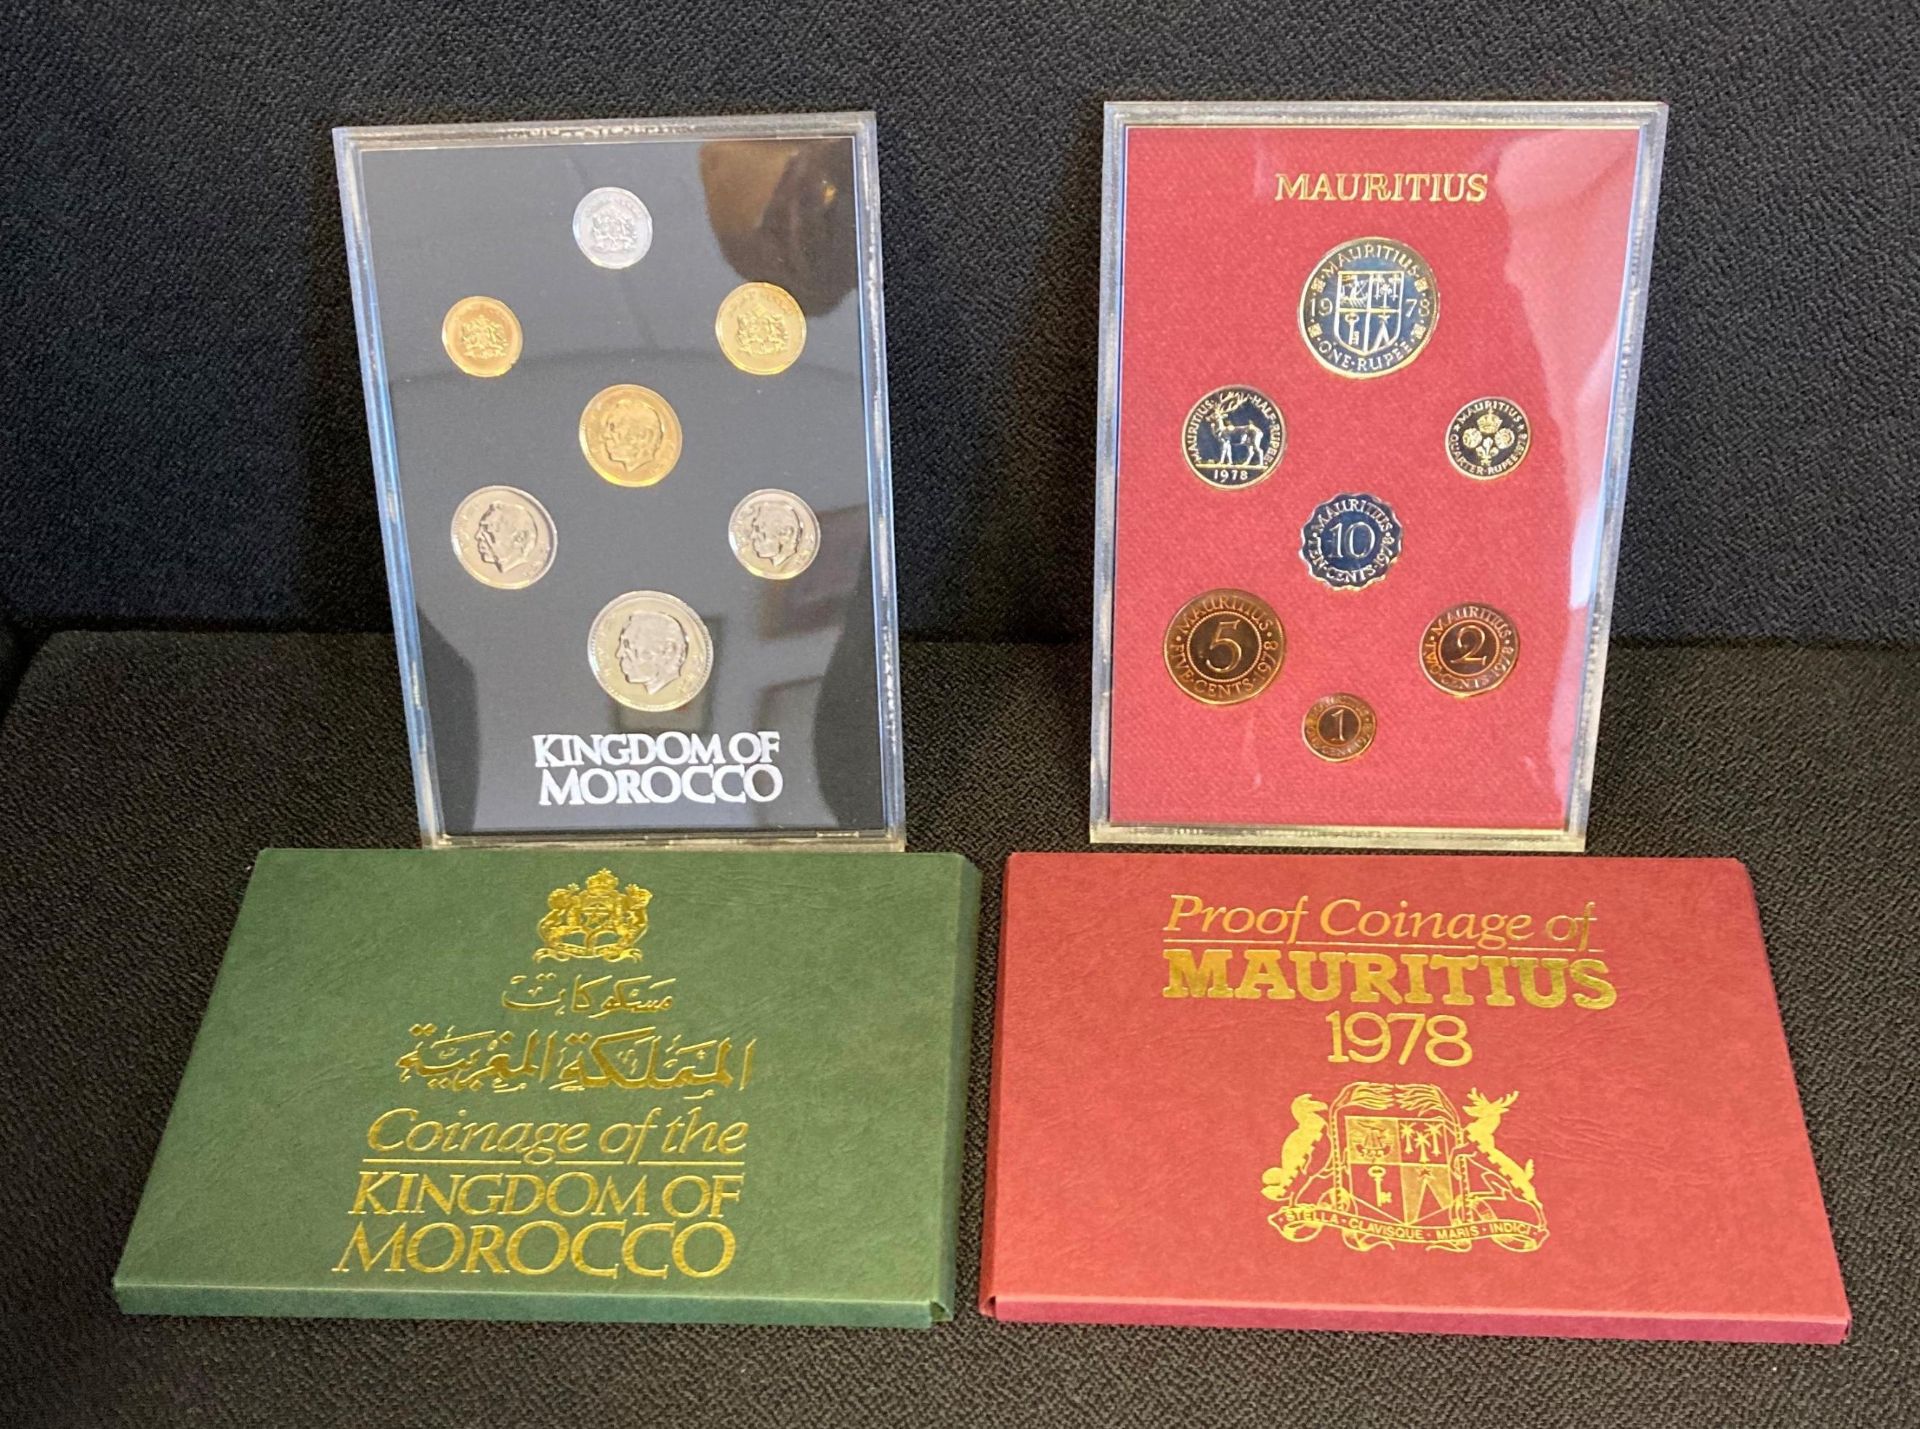 A Royal Mint Mauritius 1978 Proof Coin Set together with a Kingdom of Morocco Coin Set 1974/75